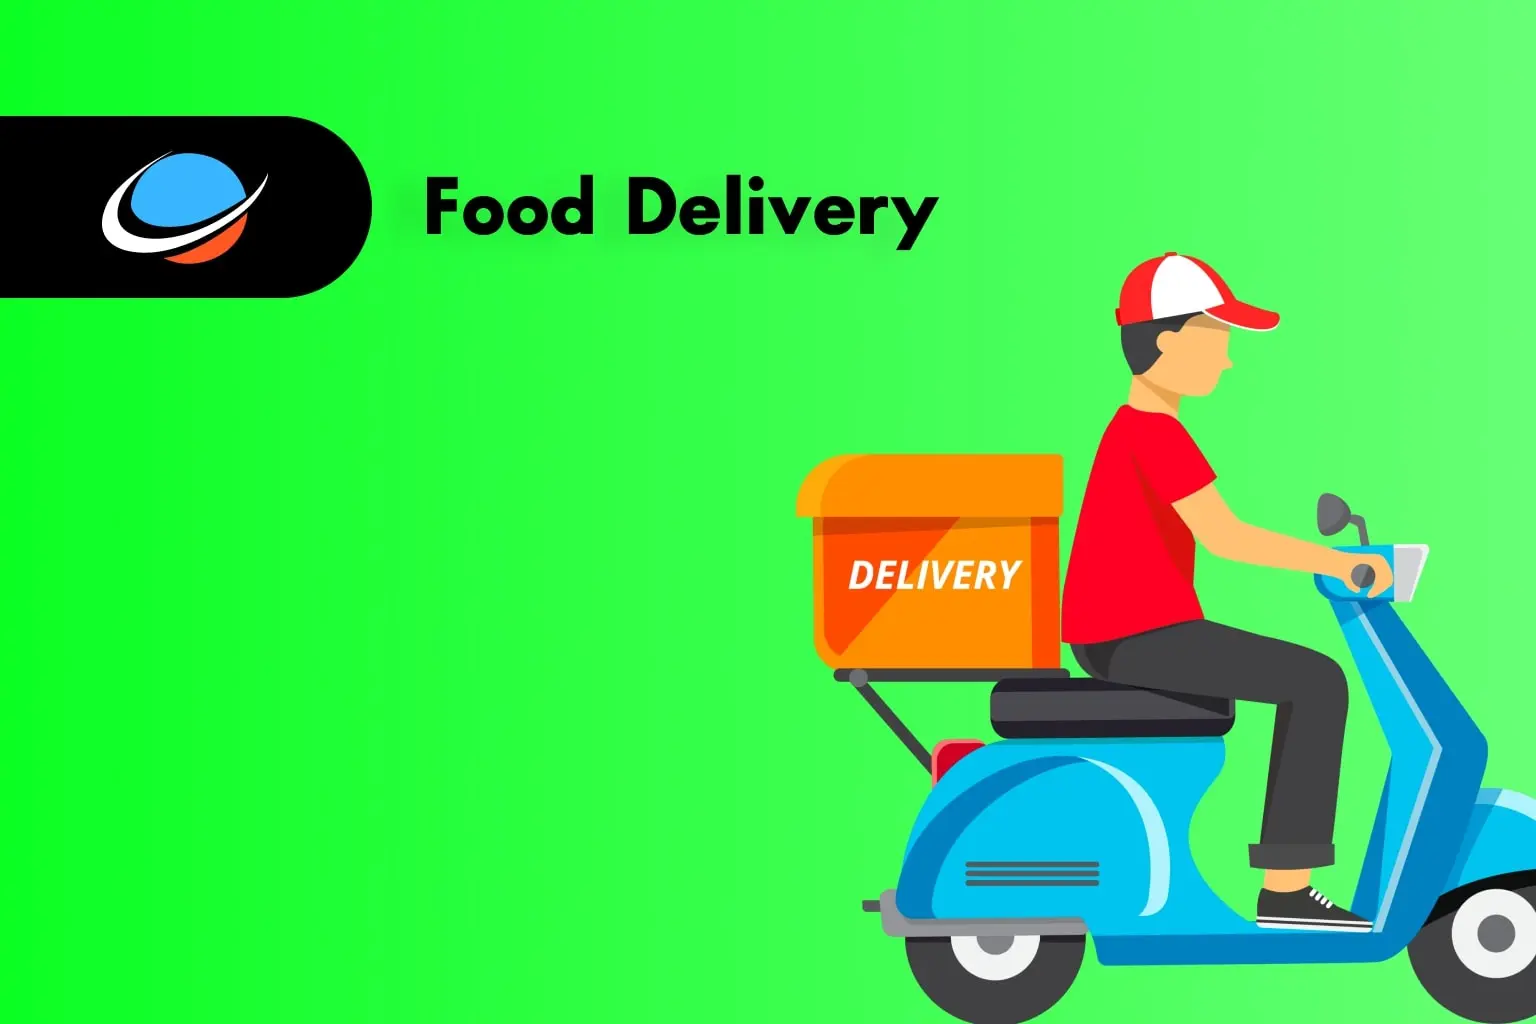 Food Delivery. Indulge in excellence with Air Global Tech's Food Delivery solutions. With over 7 years of expertise, we've crafted numerous web platforms and mobile apps, both cross-platform and native, ensuring seamless and delightful experiences for food enthusiasts. Elevate your culinary journey with our innovative technology.